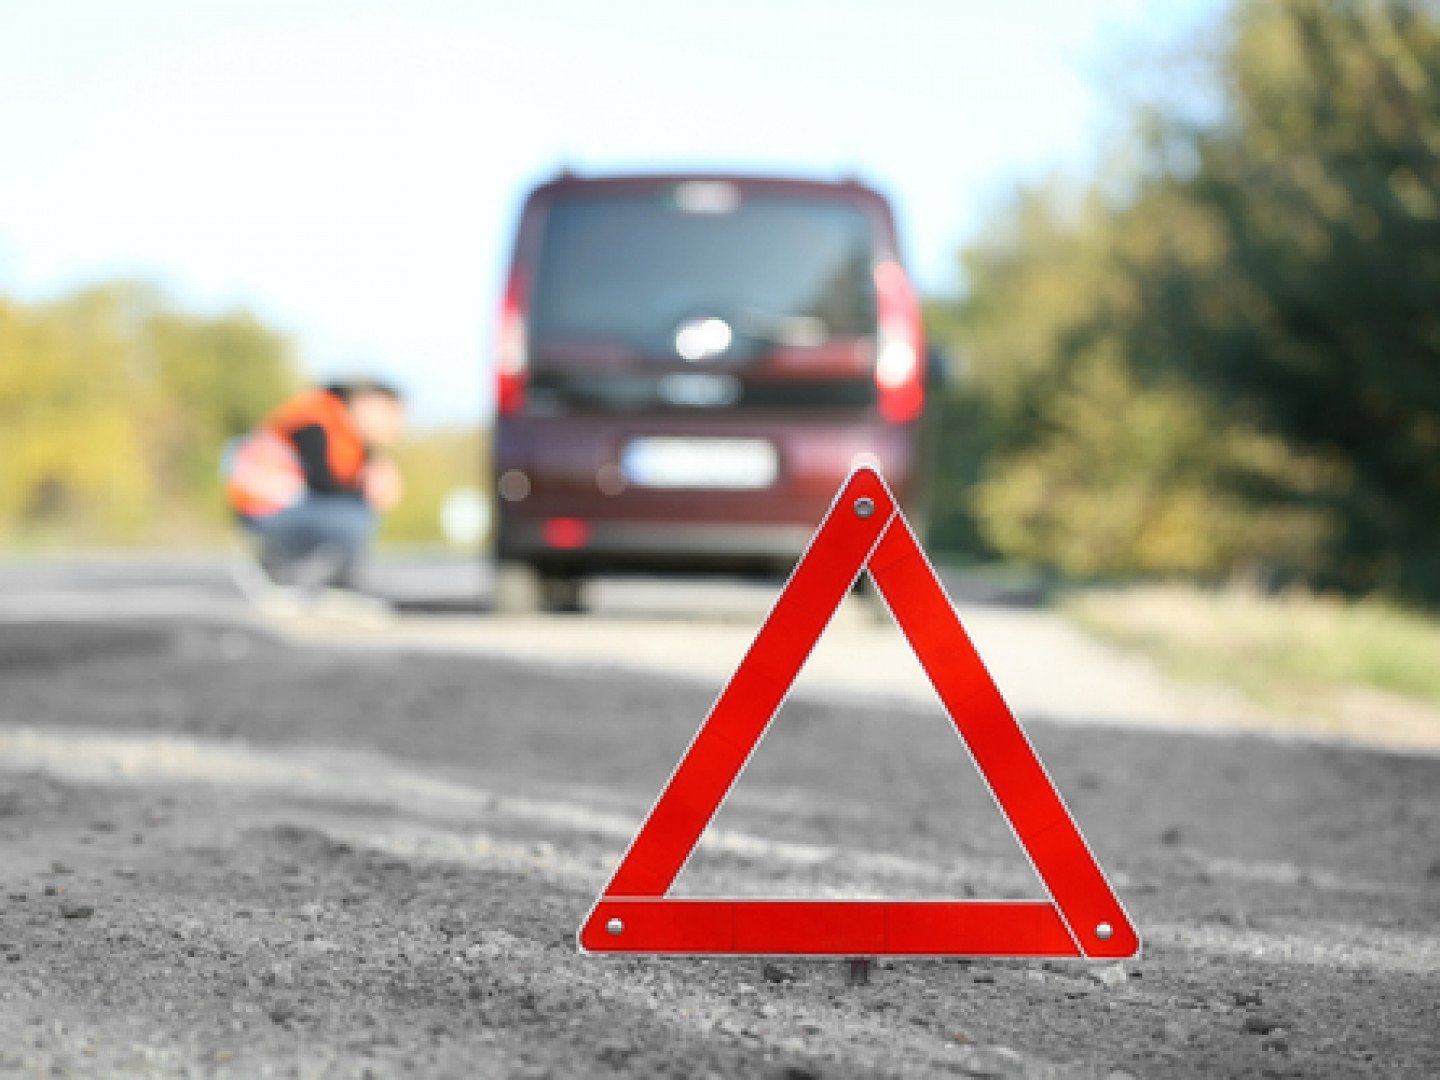 Red warning triangle on asphalt road. Tow truck worker near broken down car  Save  Try  Share Facebook Twitter Copy link Email Signed model release on file with Shutterstock, Inc.  Large • 5760 × 3840 pixels  48.8 × 32.5 cm • 300 DPI • JPEG   Select size / format Select license type   Standard License Included in plan Limited usage in print, advertising, and packaging. Unlimited web distribution.   Enhanced License $99.00 Unlimited usage in print, advertising, packaging, and merchandising. Unlimited web distribution.  What's an enhanced license?  Download Edit this image Royalty-free stock photo ID: 535198264  Red warning triangle on asphalt road